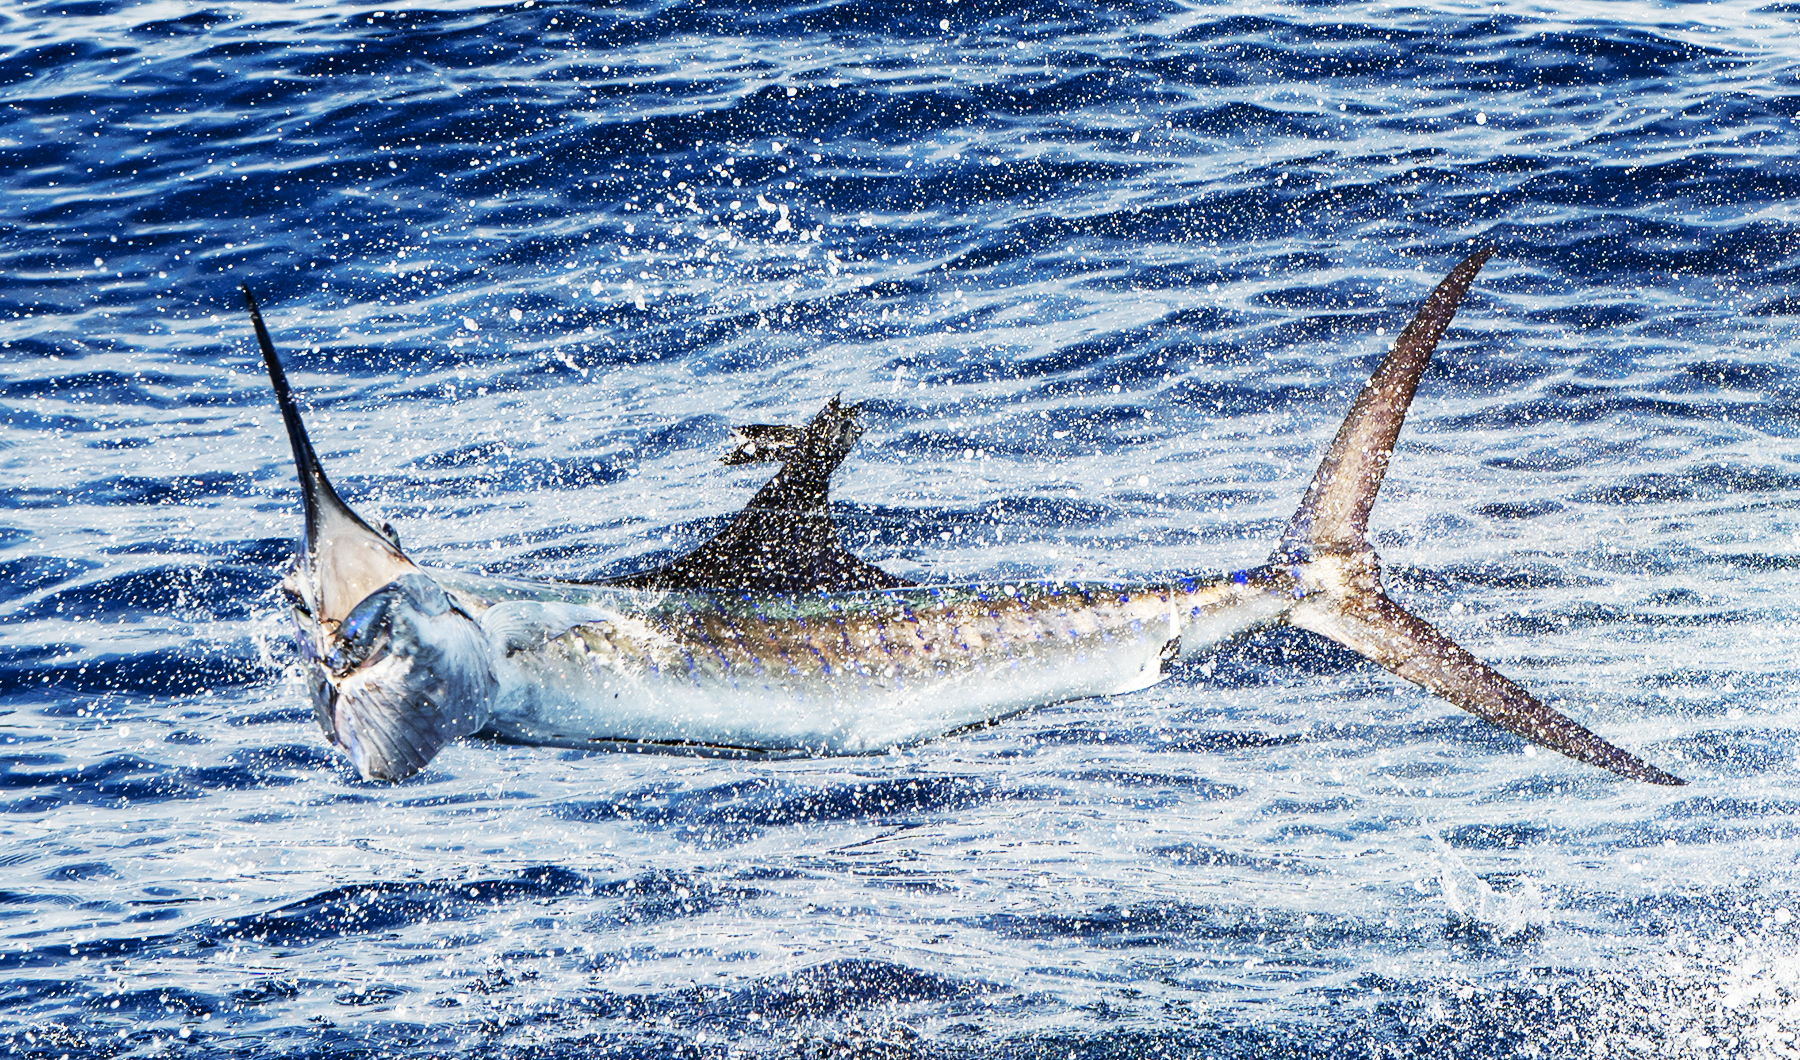 a billfish caught with a circle hook. it is airborne